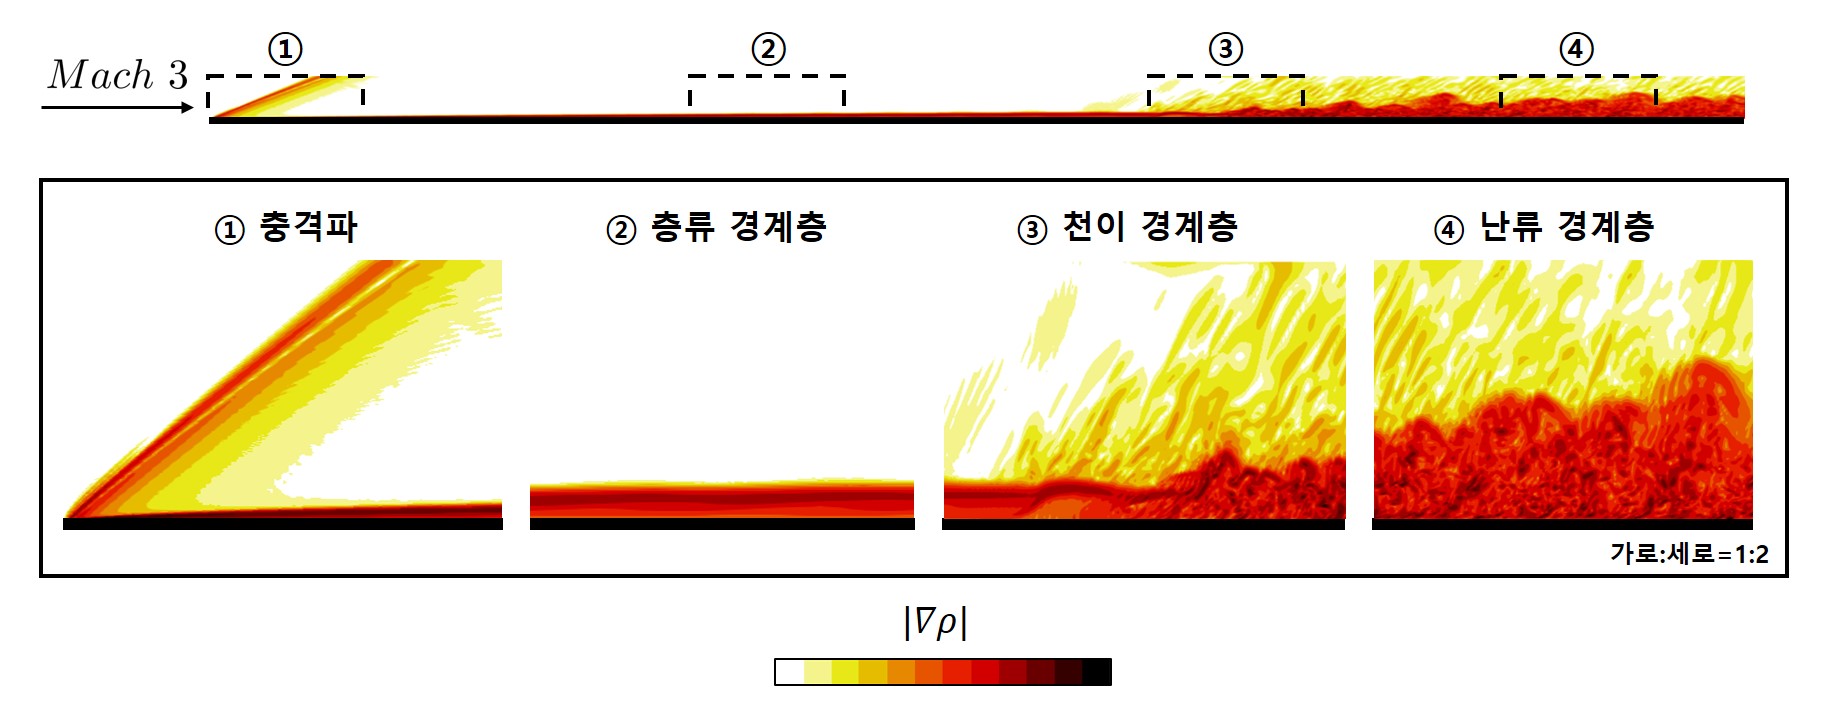 Professor Solkeun Jee's joint research team contributes to the analysis of aerodynamic characteristics of high-speed aircraft by predicting the start of supersonic turbulent flow 이미지